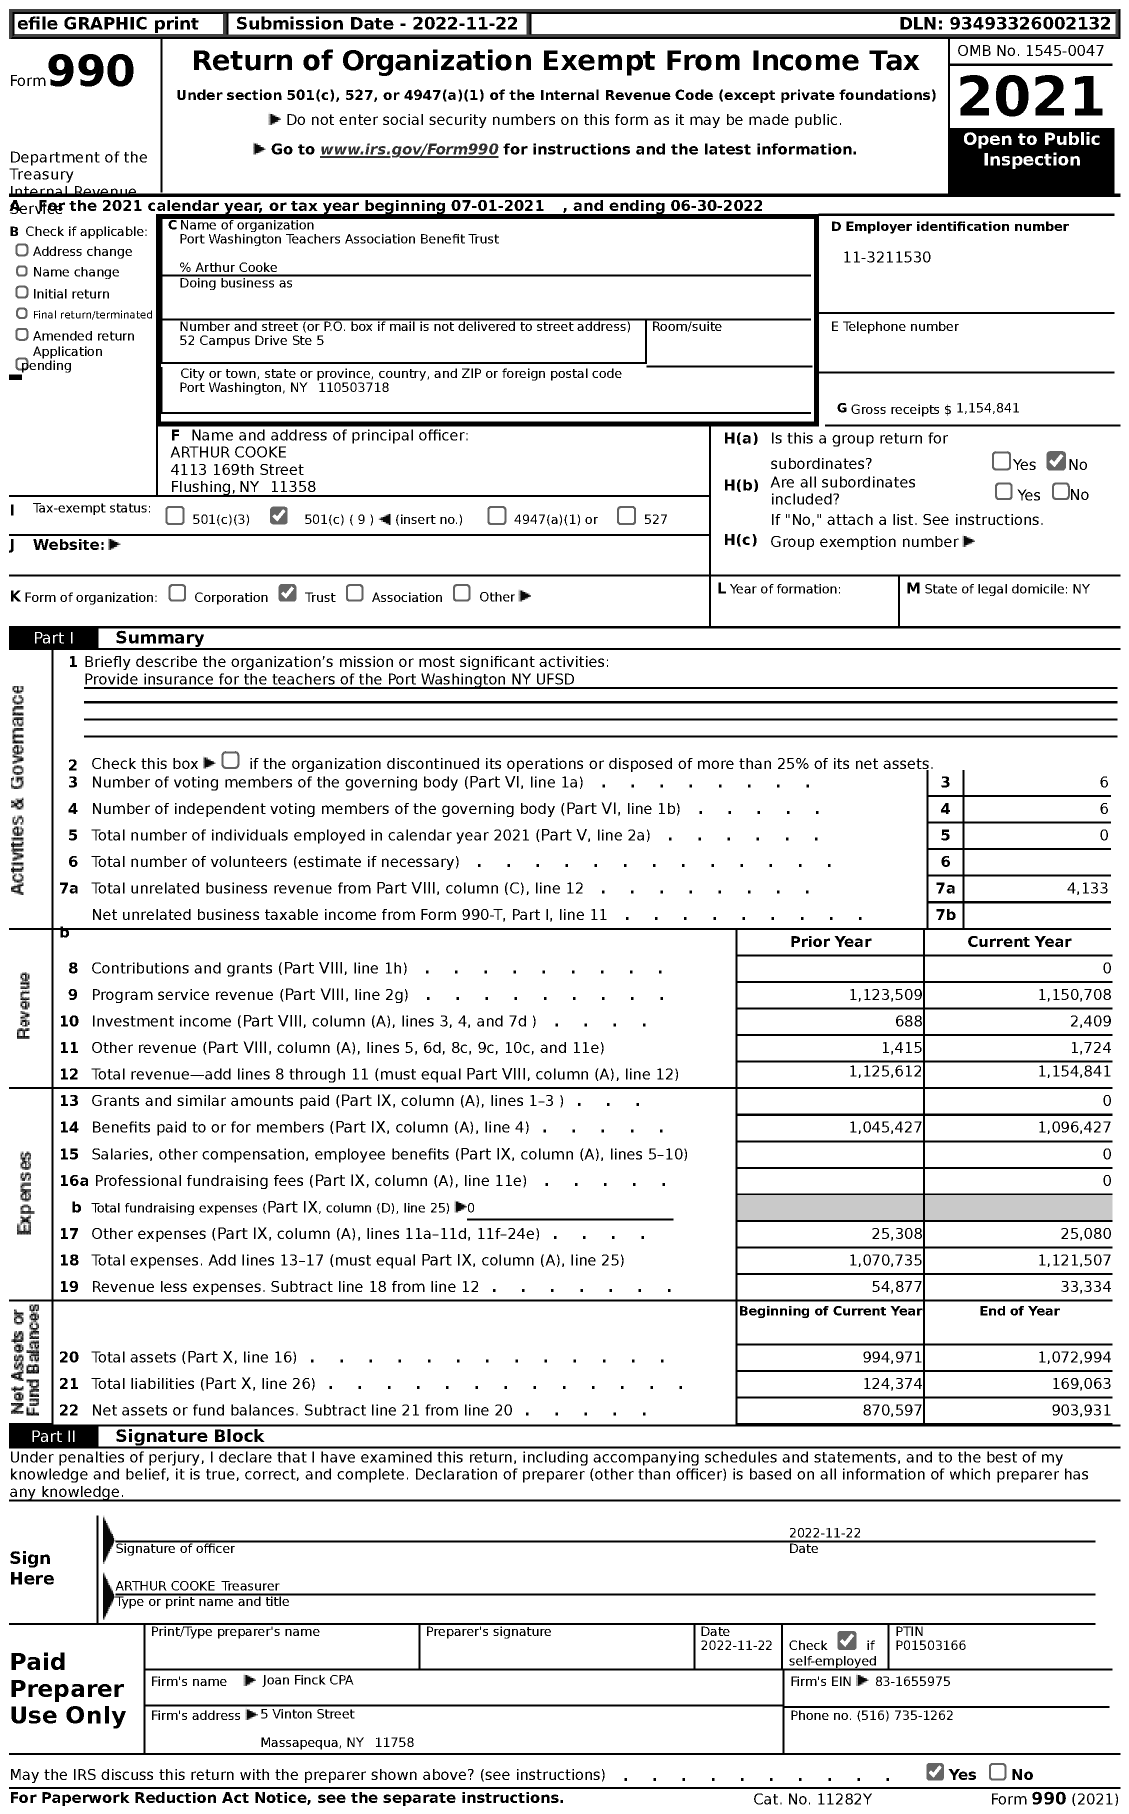 Image of first page of 2021 Form 990 for Port Washington Teachers Association Benefit Trust